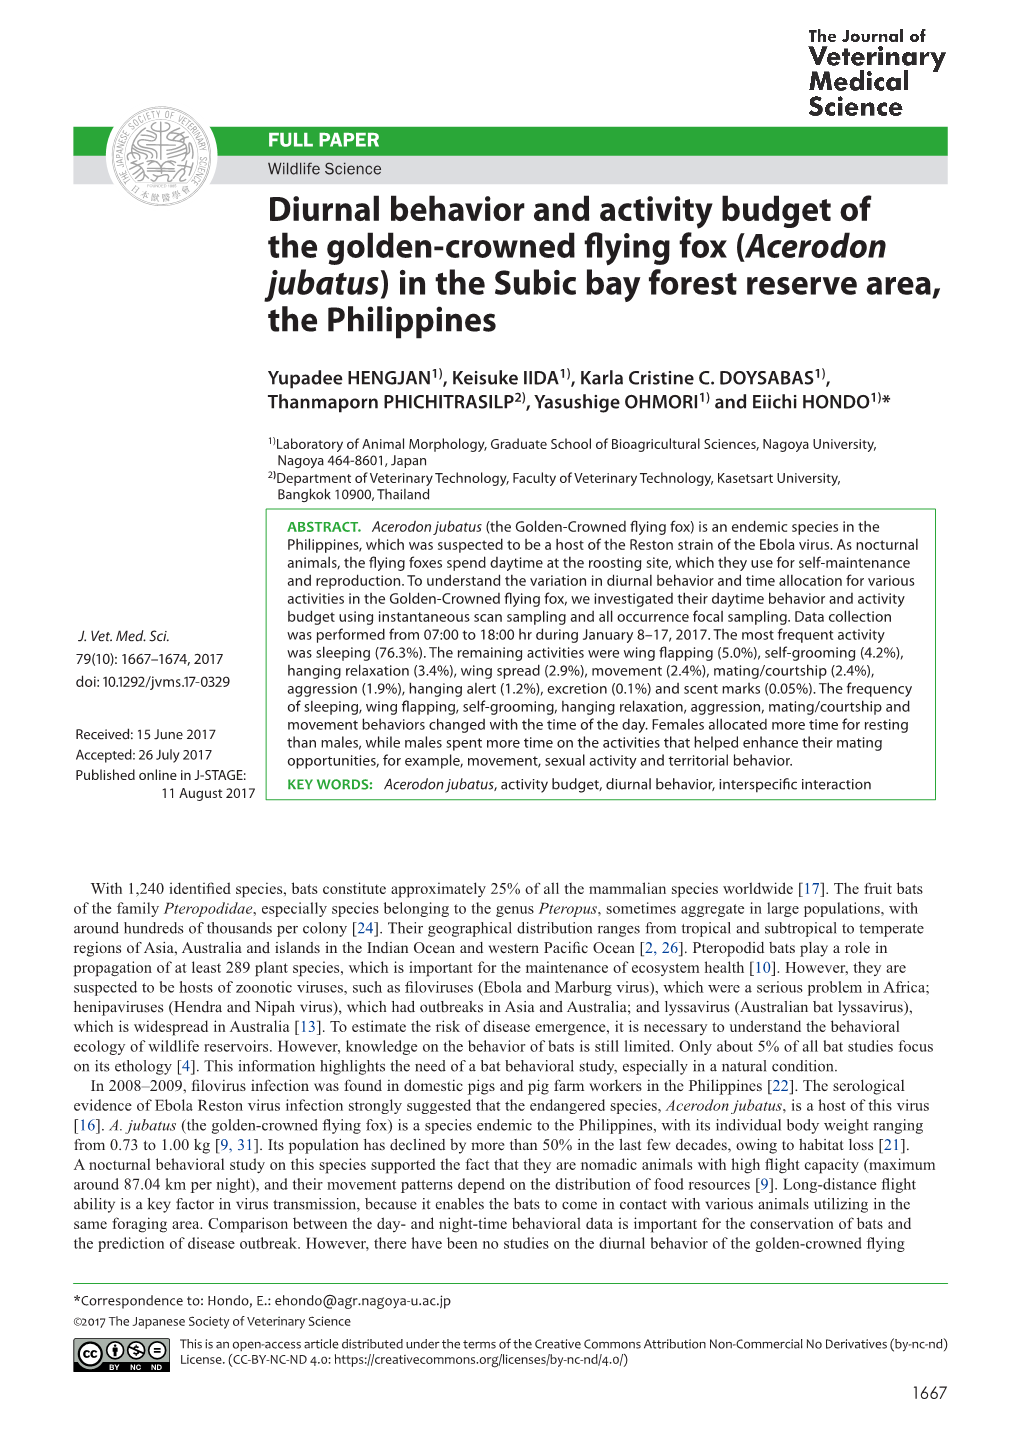 Diurnal Behavior and Activity Budget of the Golden-Crowned Flying Fox (Acerodon Jubatus) in the Subic Bay Forest Reserve Area, the Philippines